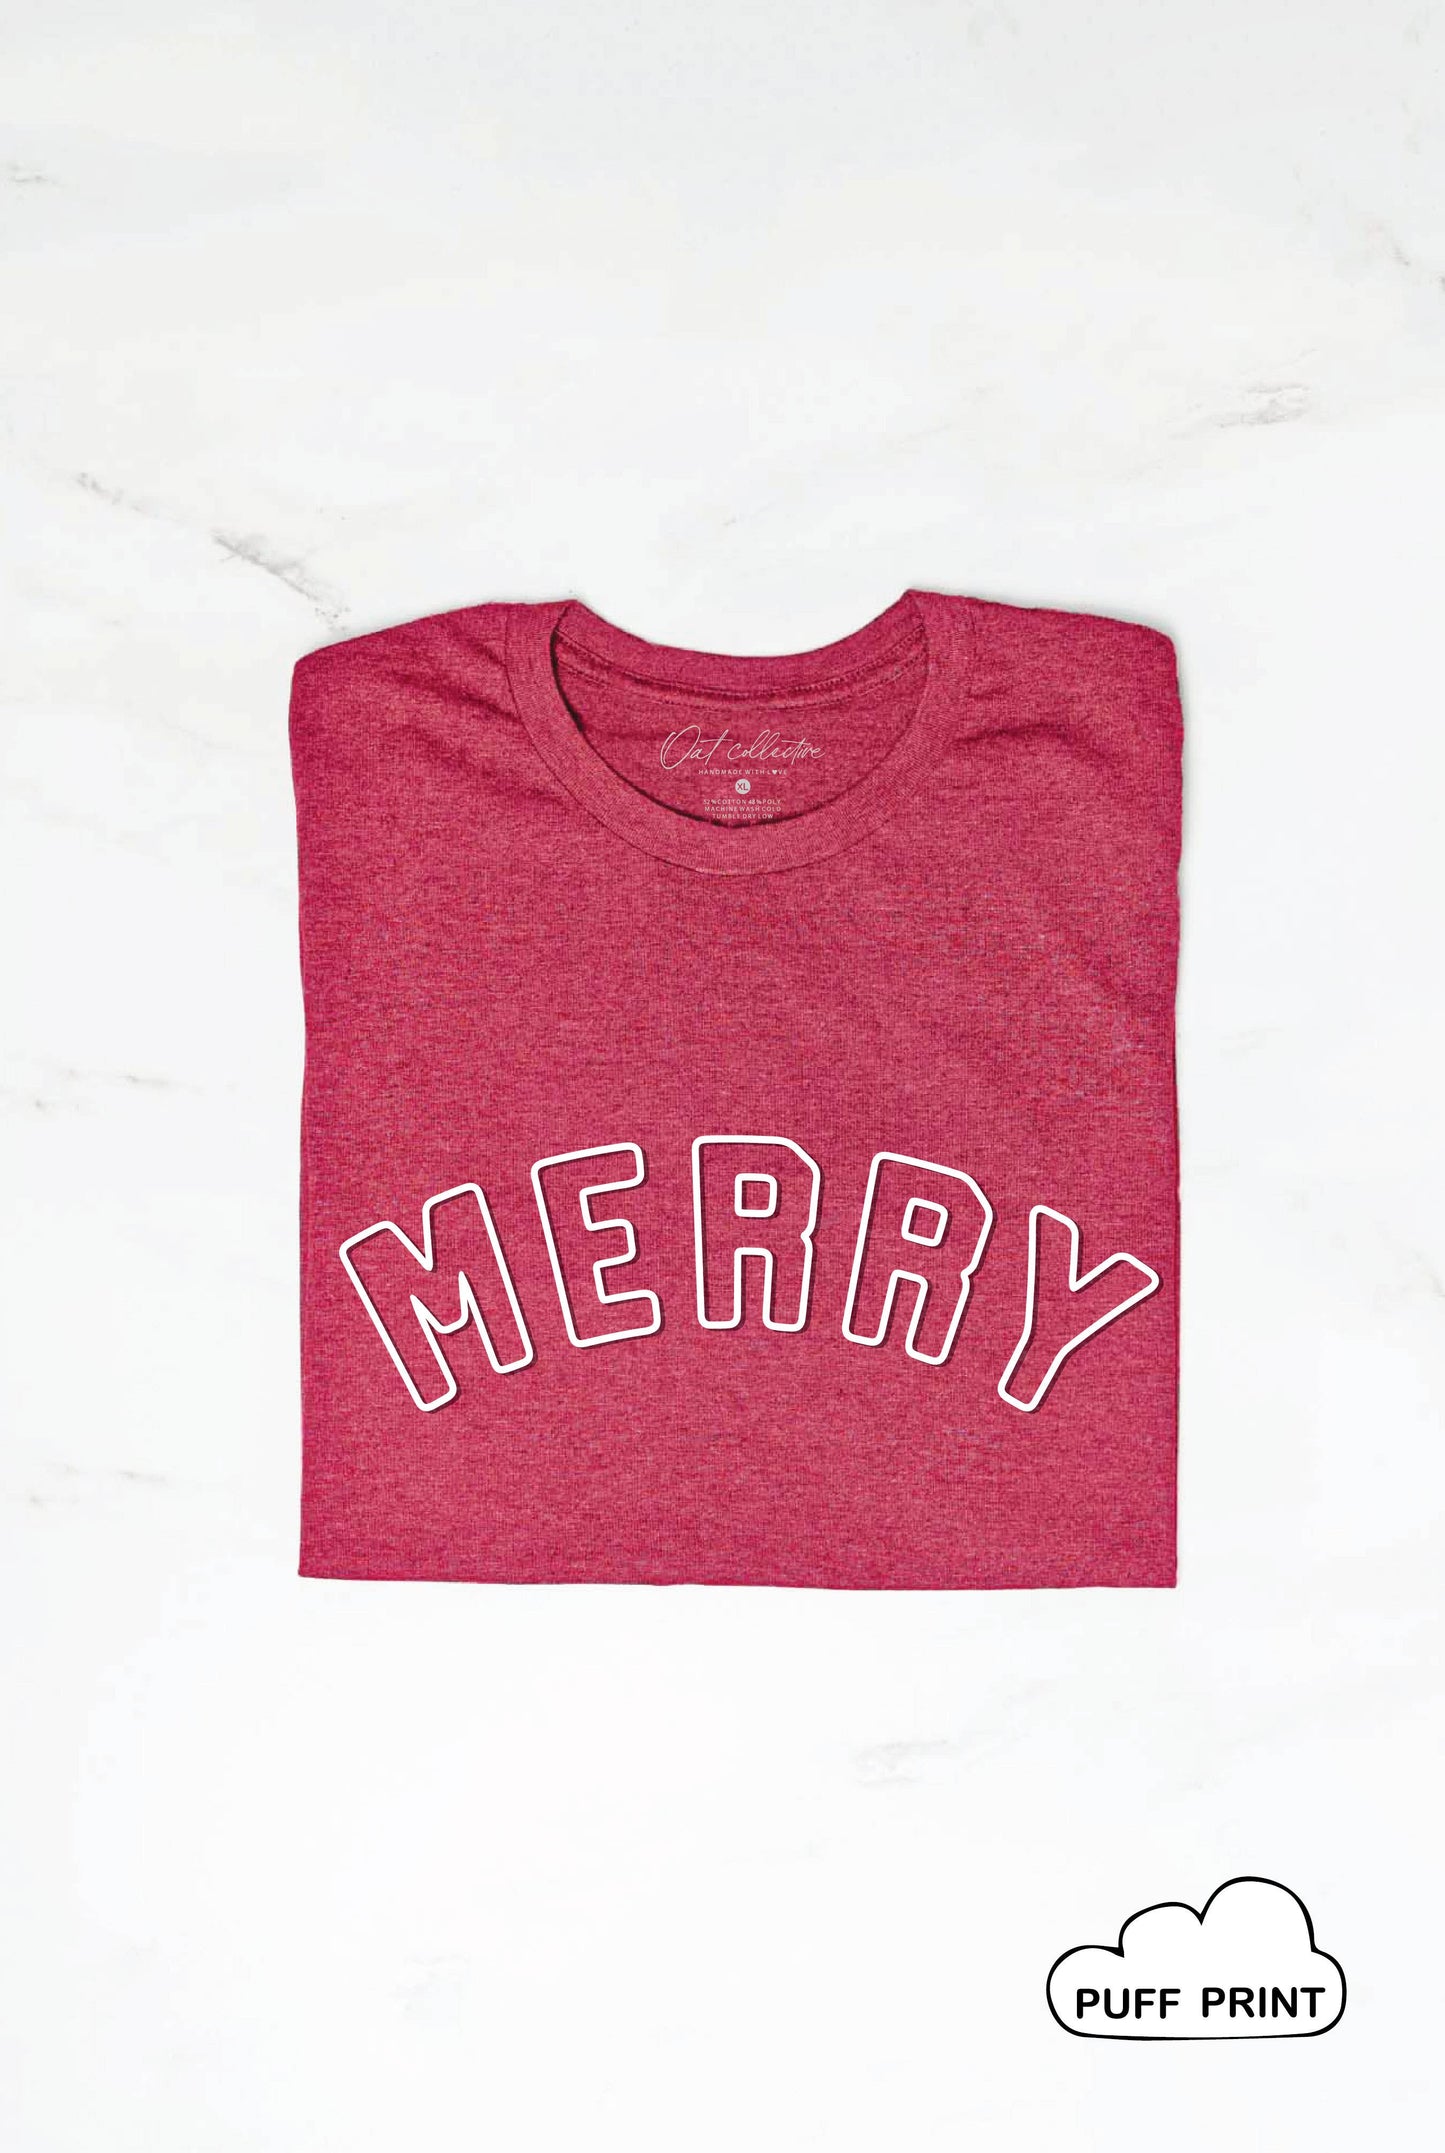 MERRY PUFF PRINT Graphic T-shirt: XL / HEATHER RED